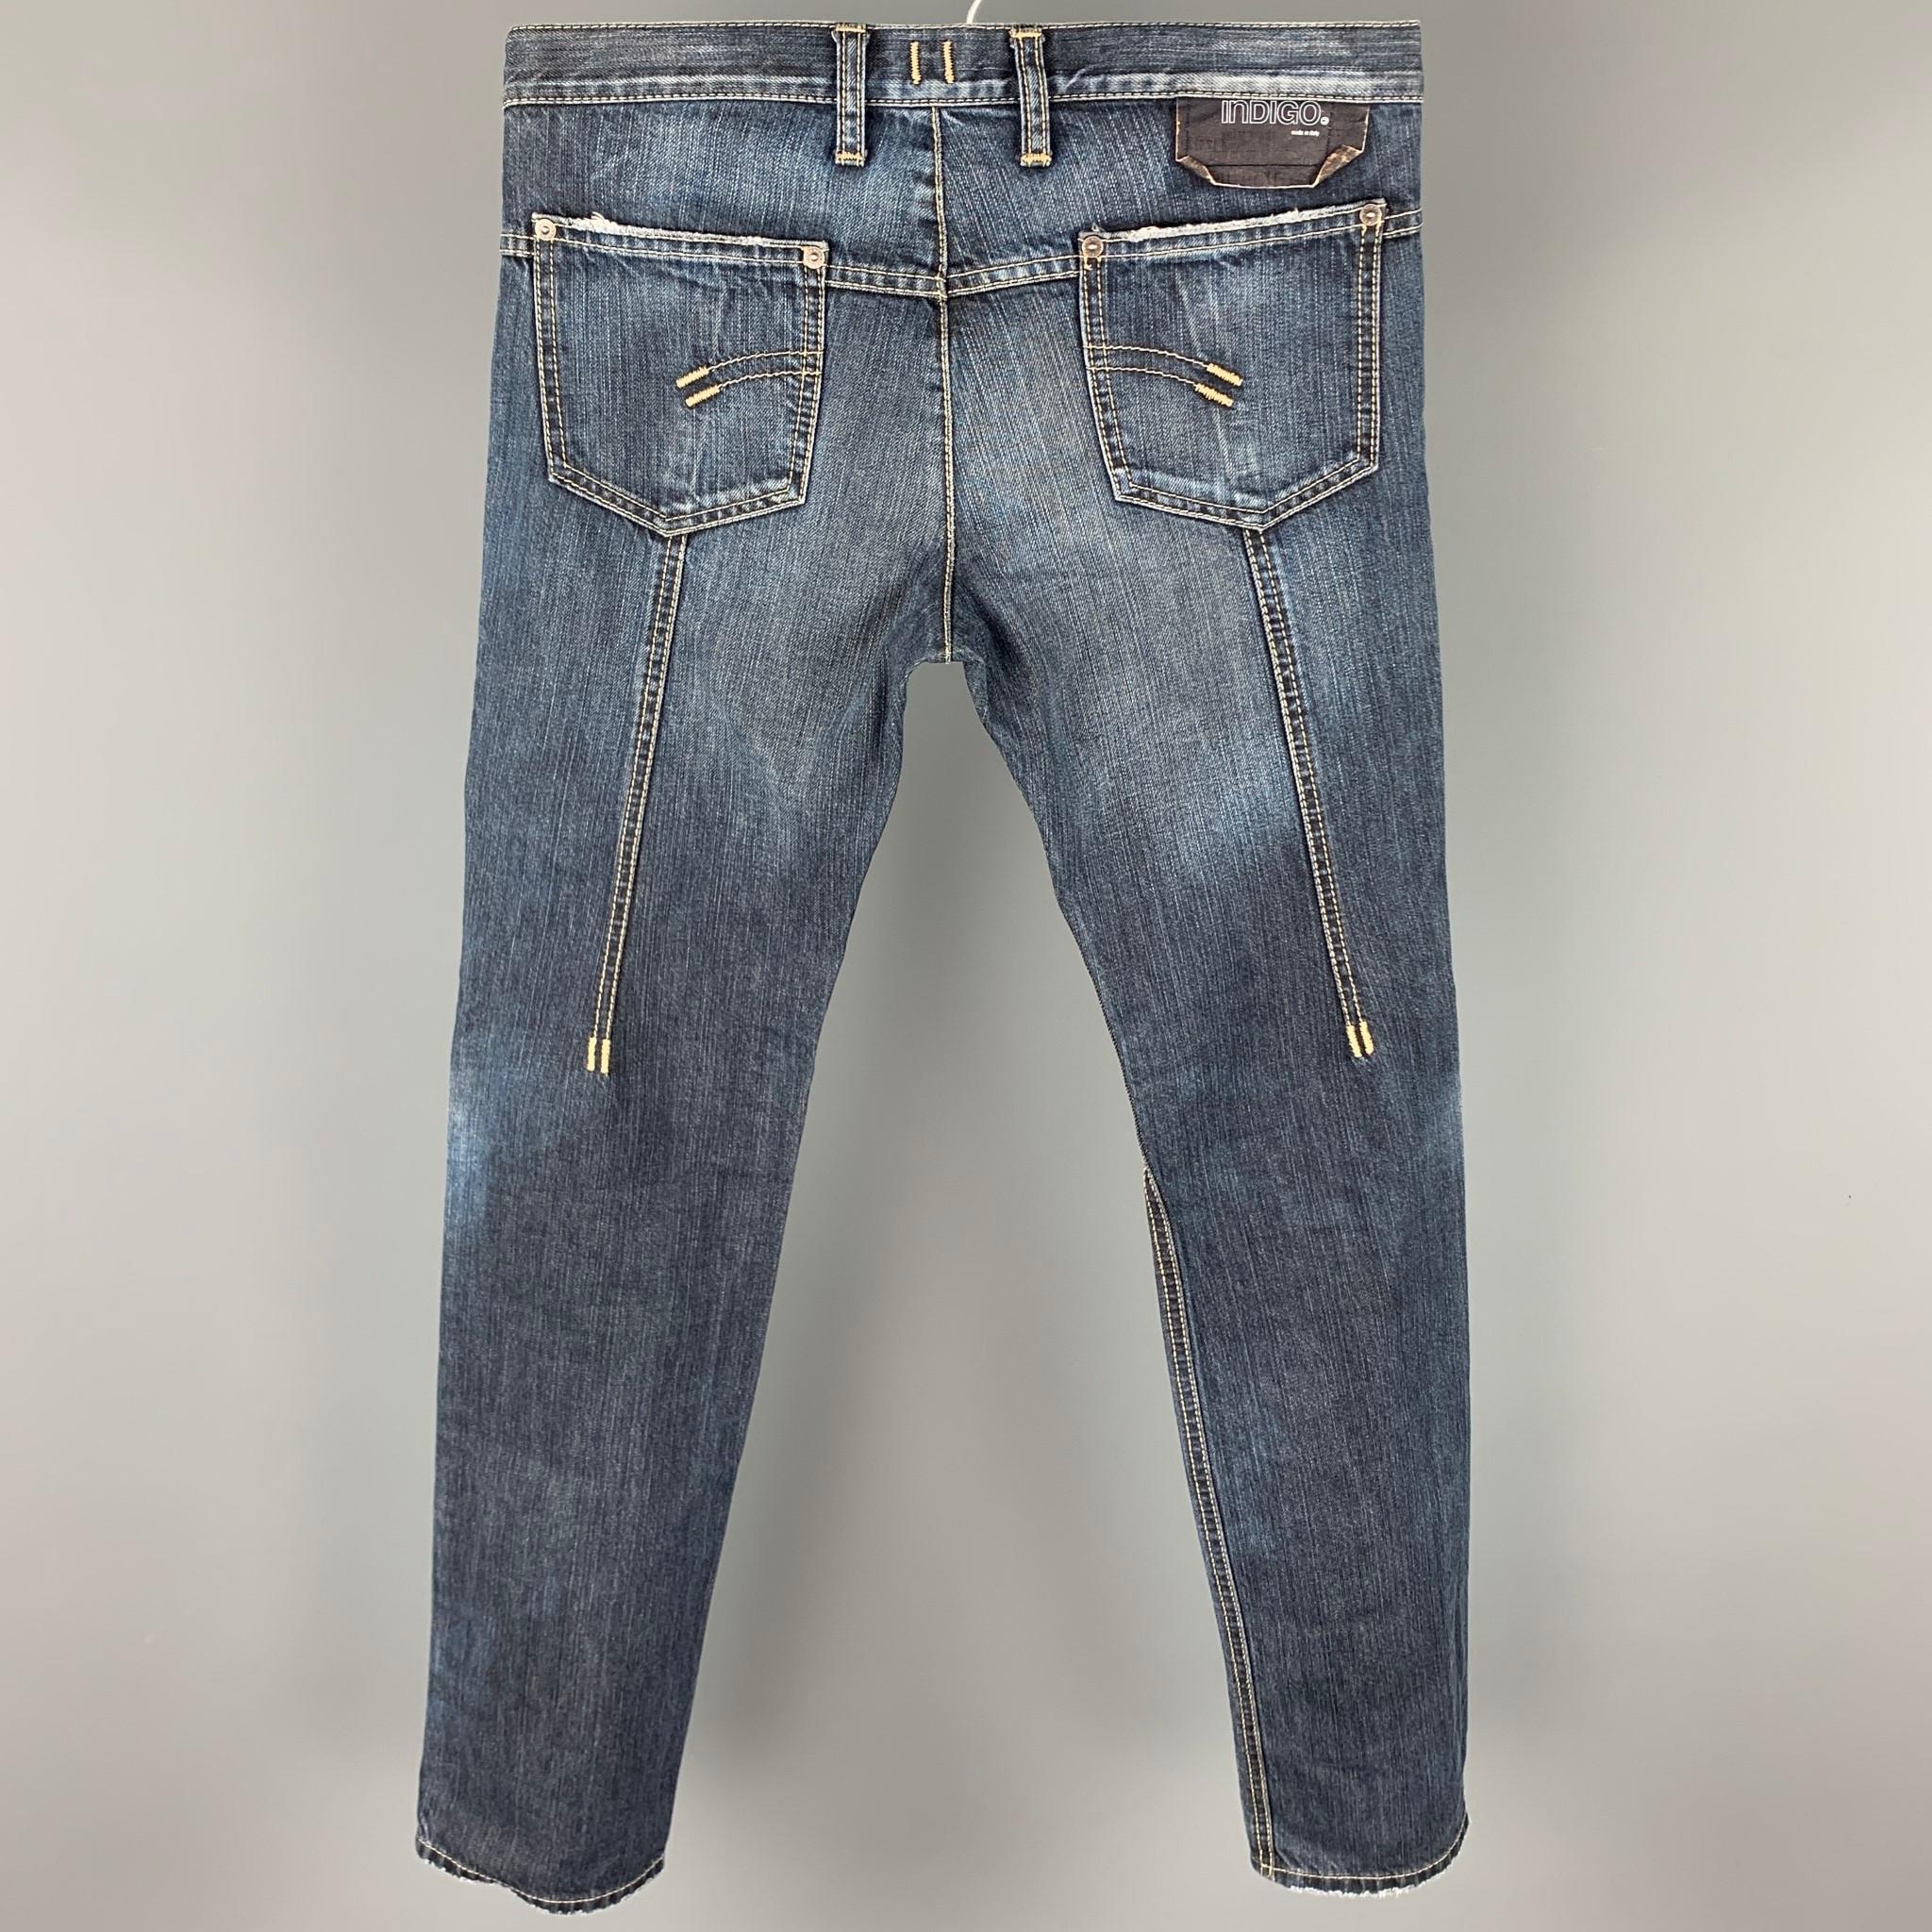 NEIL BARRETT jeans comes in a indigo denim with contrast stitching featuring a slim fit, zipper pocket, and a button fly closure. Made in Italy.

Very Good Pre-Owned Condition.
Marked: 30

Measurements:

Waist: 32 in.
Rise: 9.5 in.
Inseam: 33 in. 